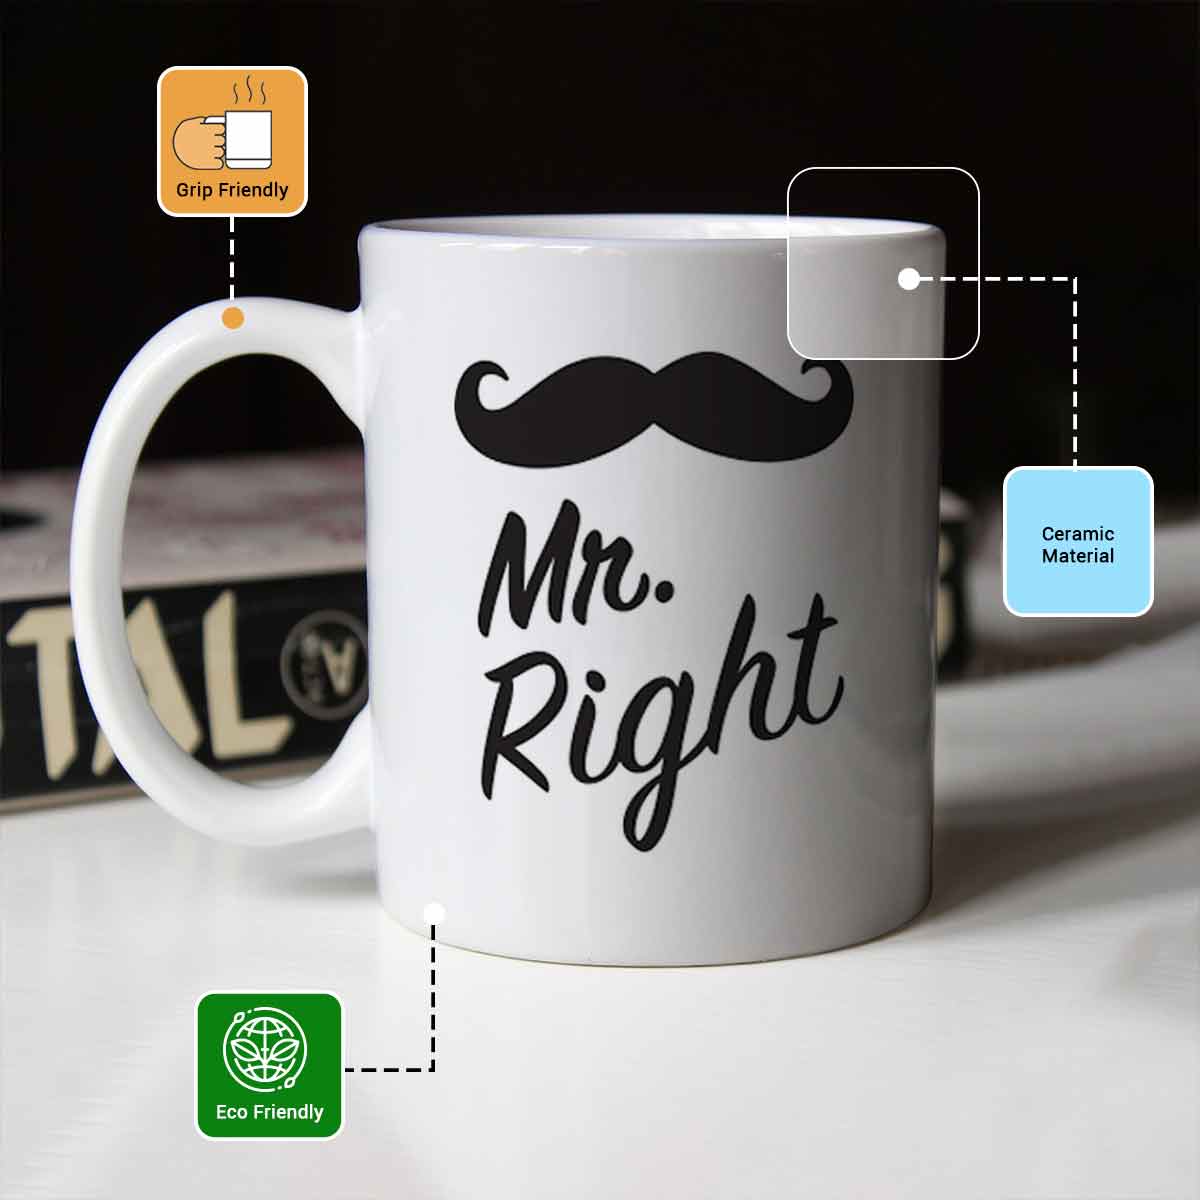 The Mr. & Mrs. Right Couple Mugs Set of 2